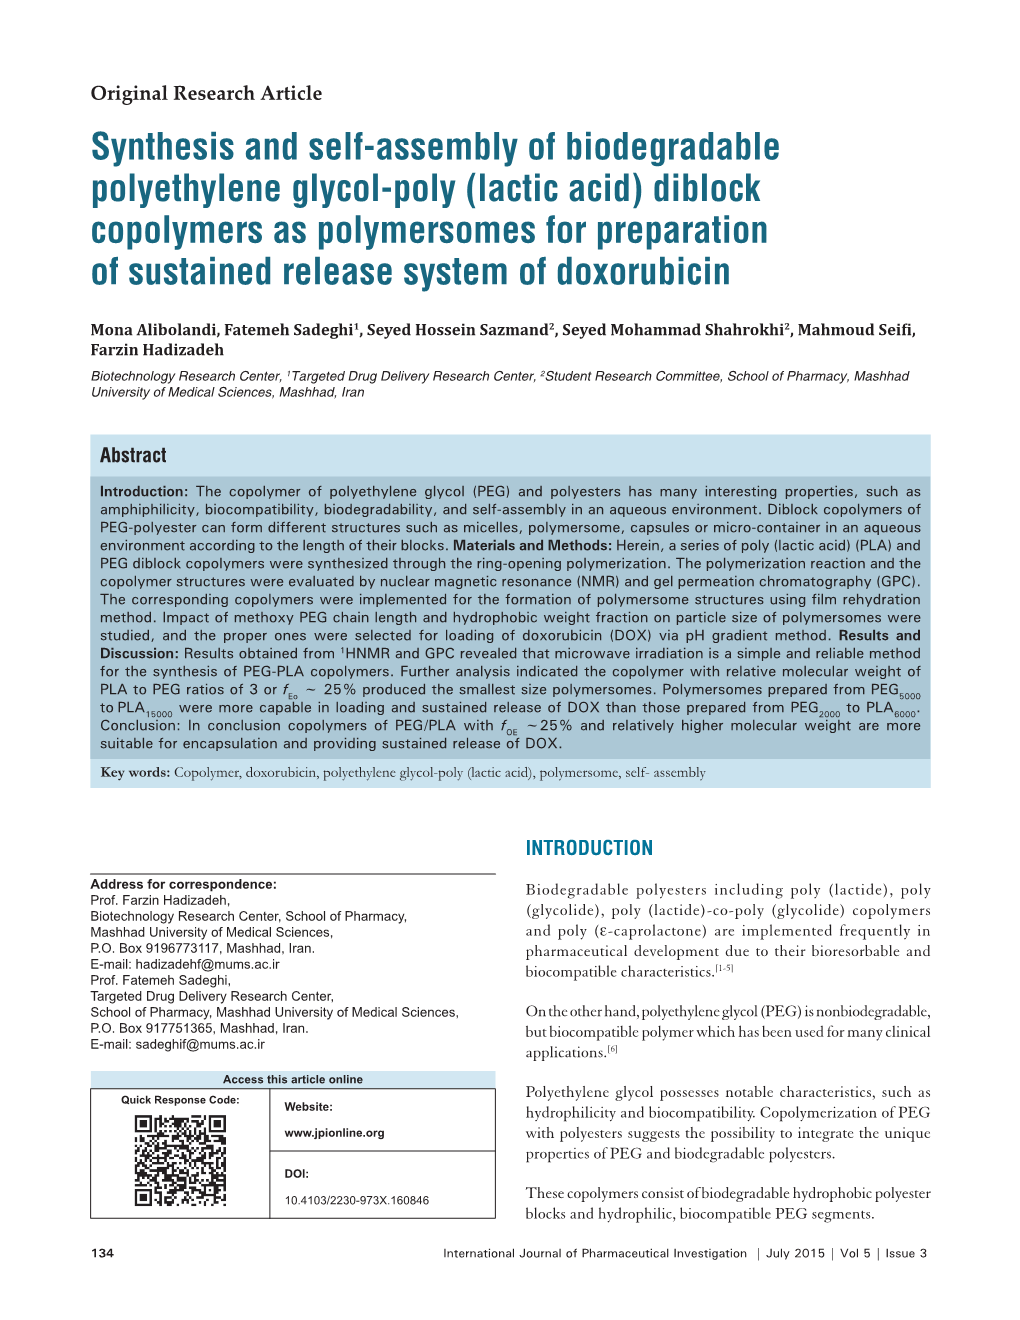 Synthesis and Self-Assembly of Biodegradable Polyethylene Glycol